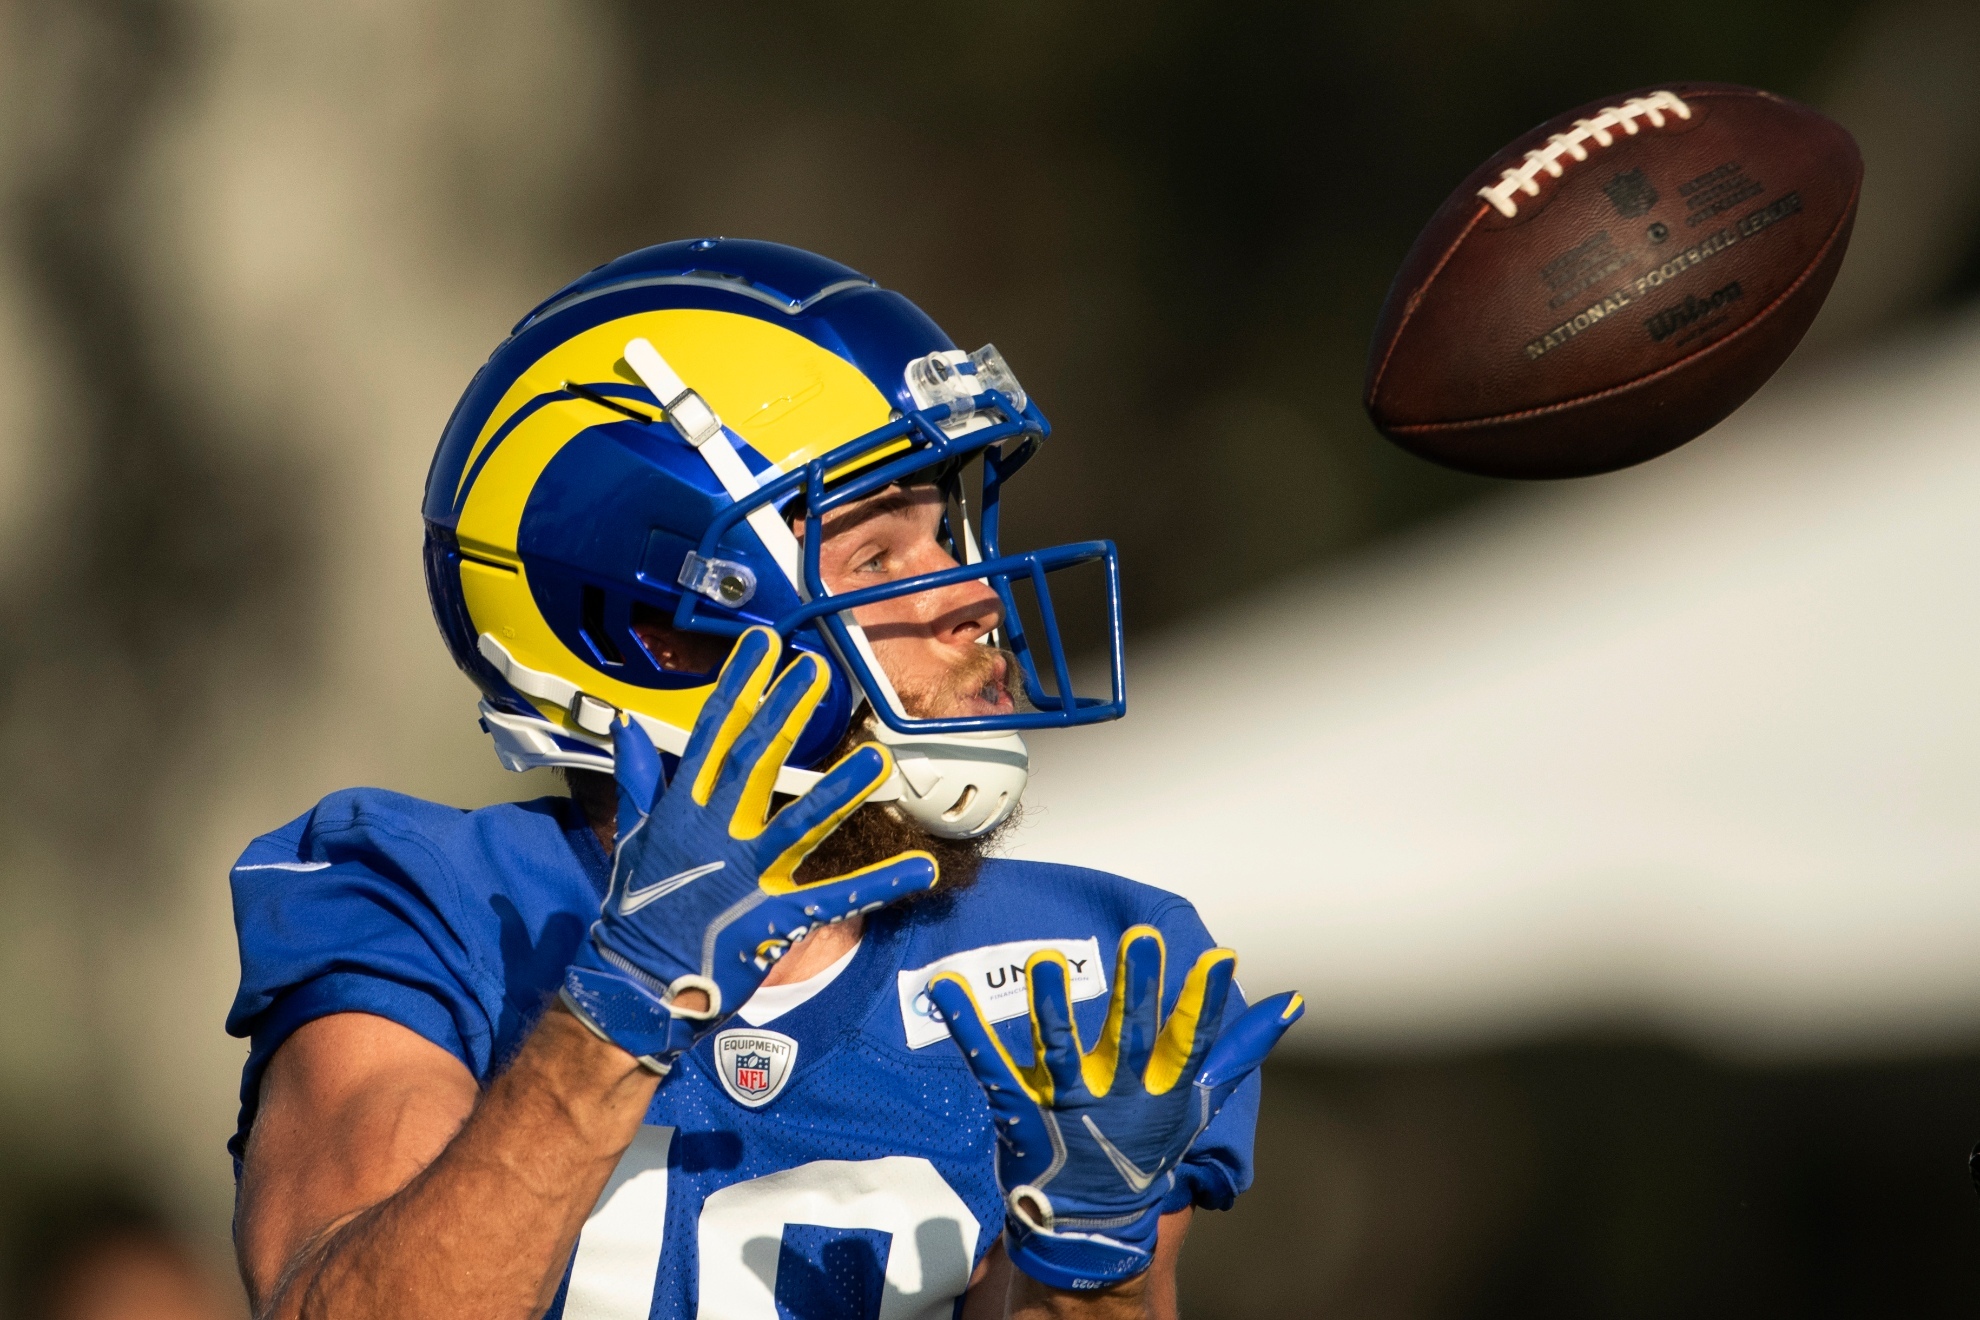 Image of Cooper Kupp during a pre-season game.